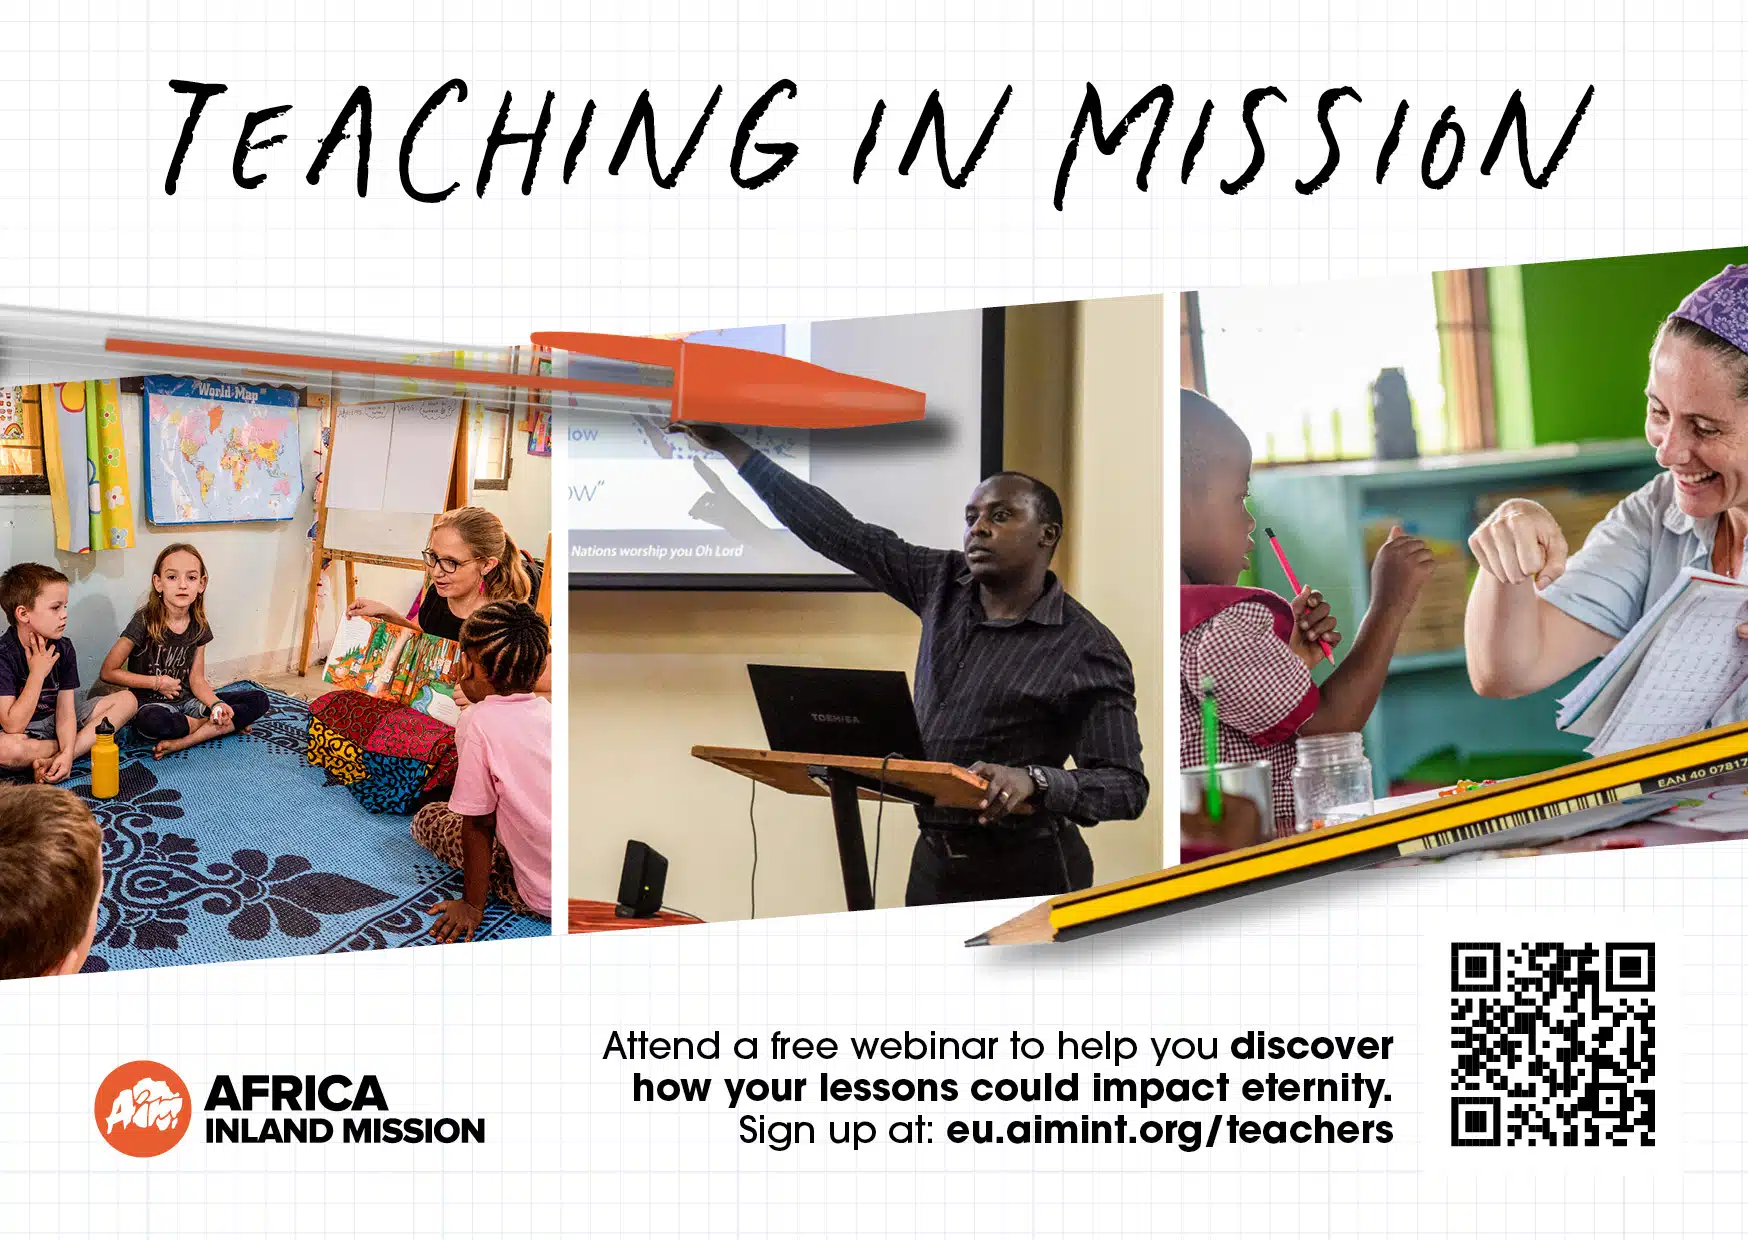 Teaching in mission image